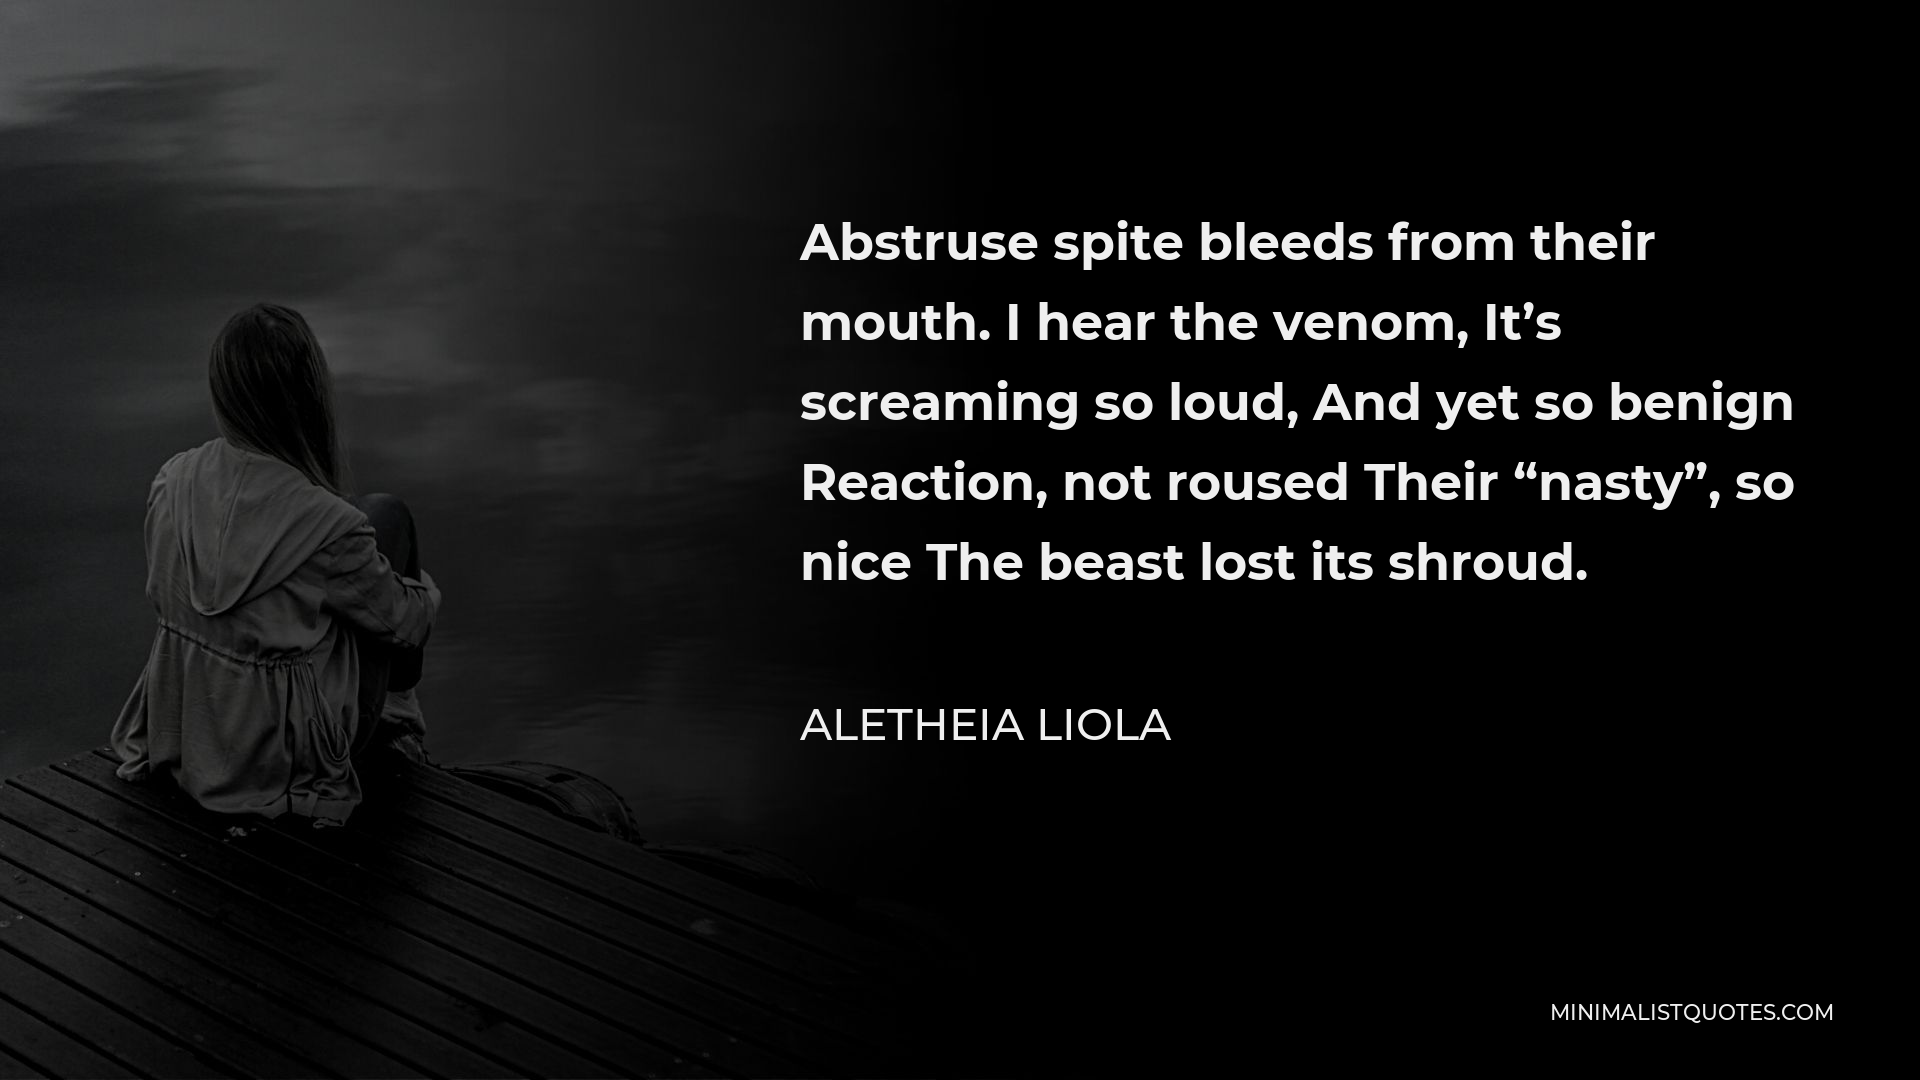 Aletheia Liola Quote - Abstruse spite bleeds from their mouth. I hear the venom, It’s screaming so loud, And yet so benign Reaction, not roused Their “nasty”, so nice The beast lost its shroud.